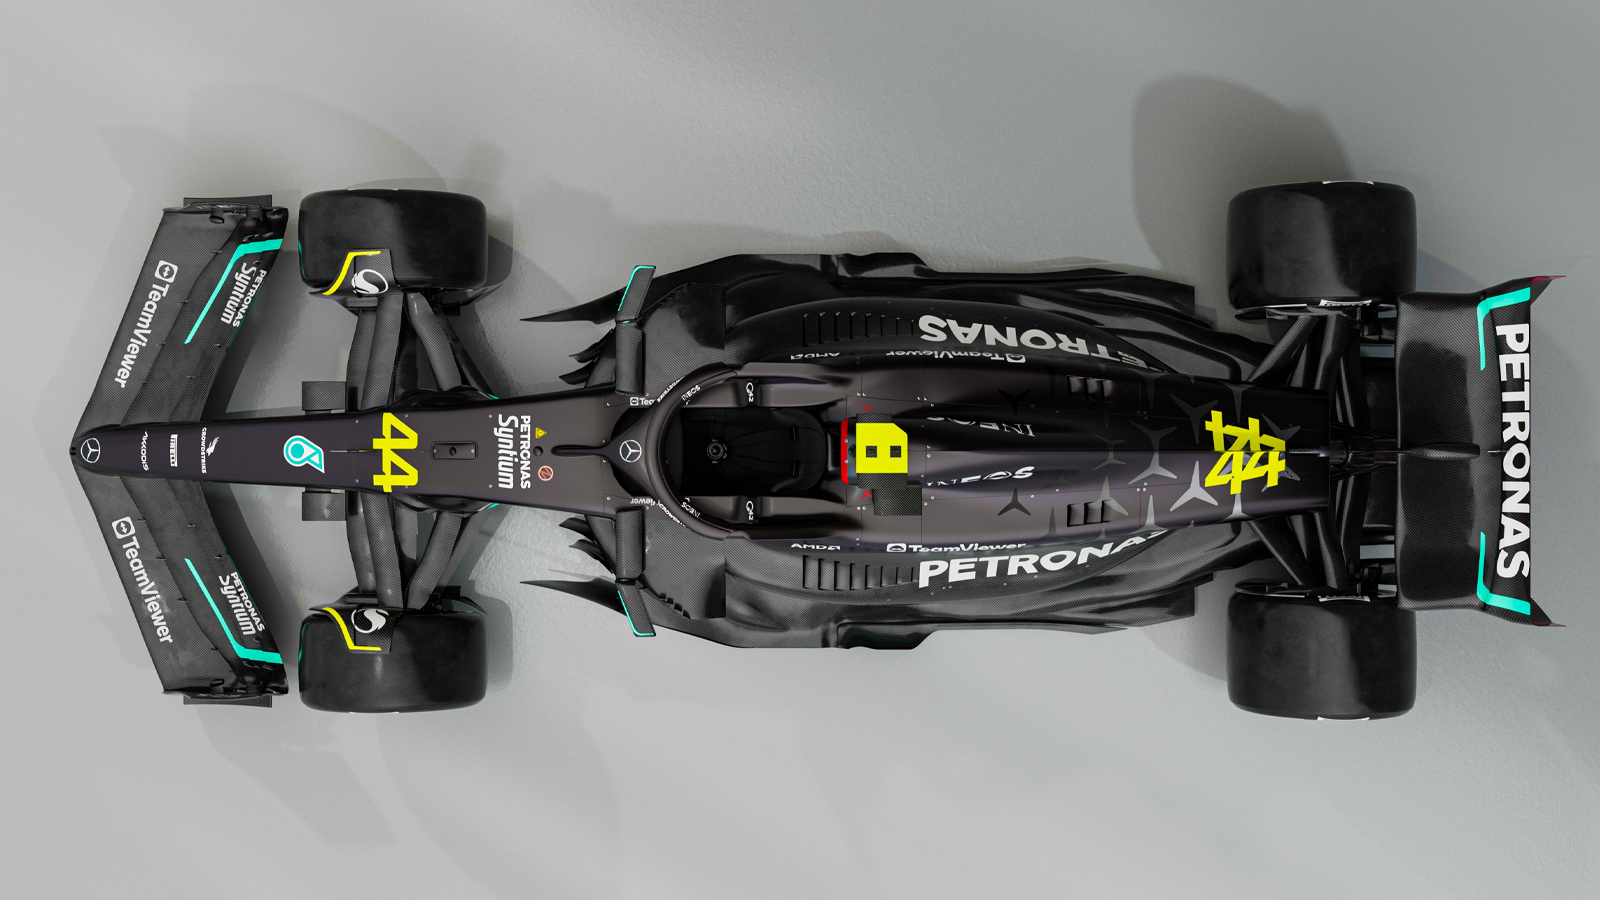 Mercedes offers a first look at their 2023 F1 car, the W14 : PlanetF1